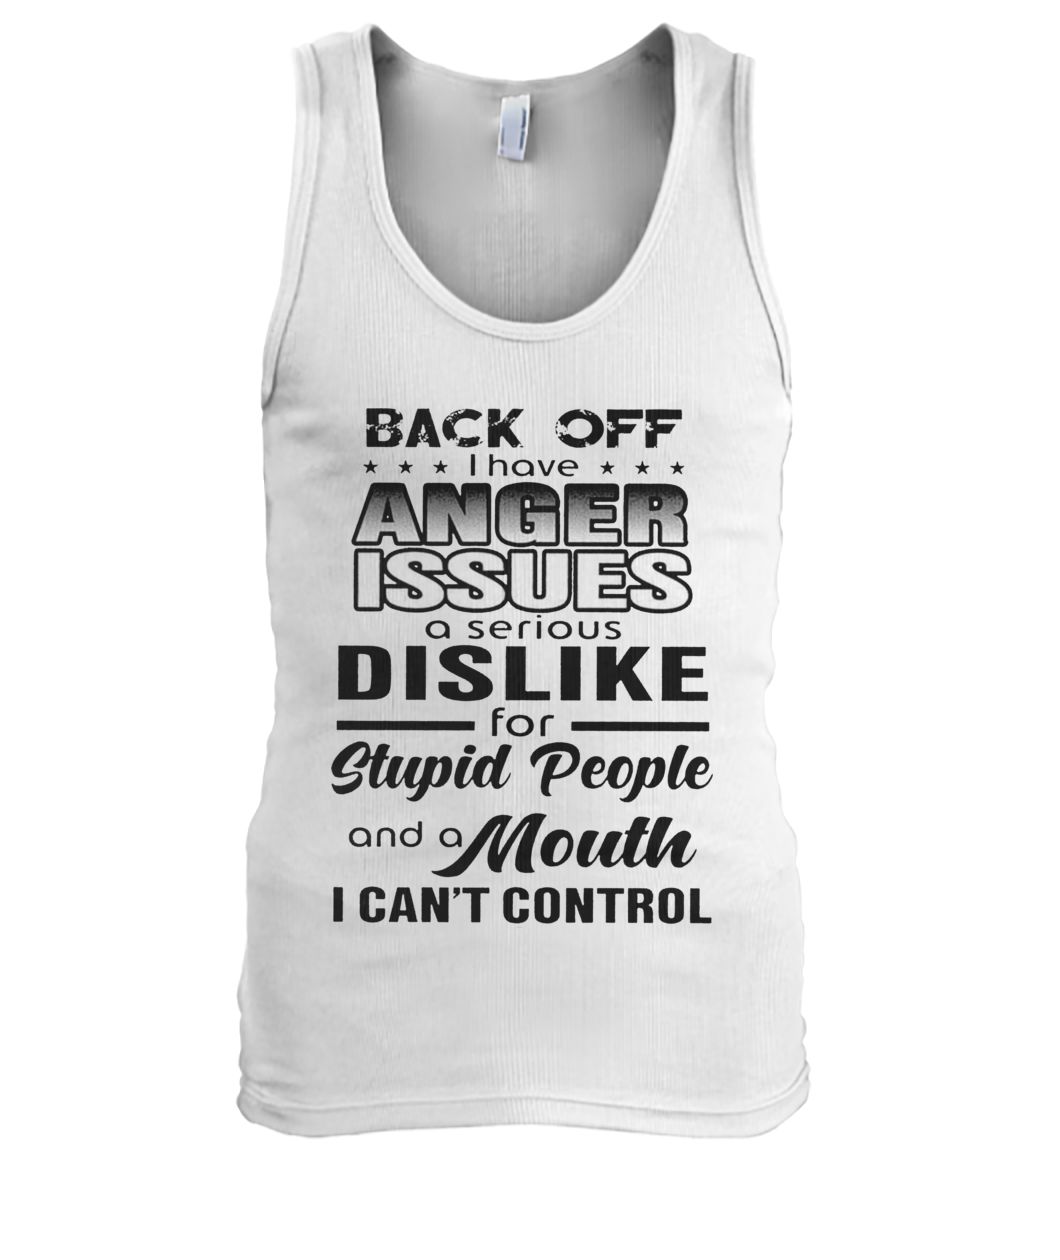 Back off I have a anger issues and serious dislike for stupid people men's tank top